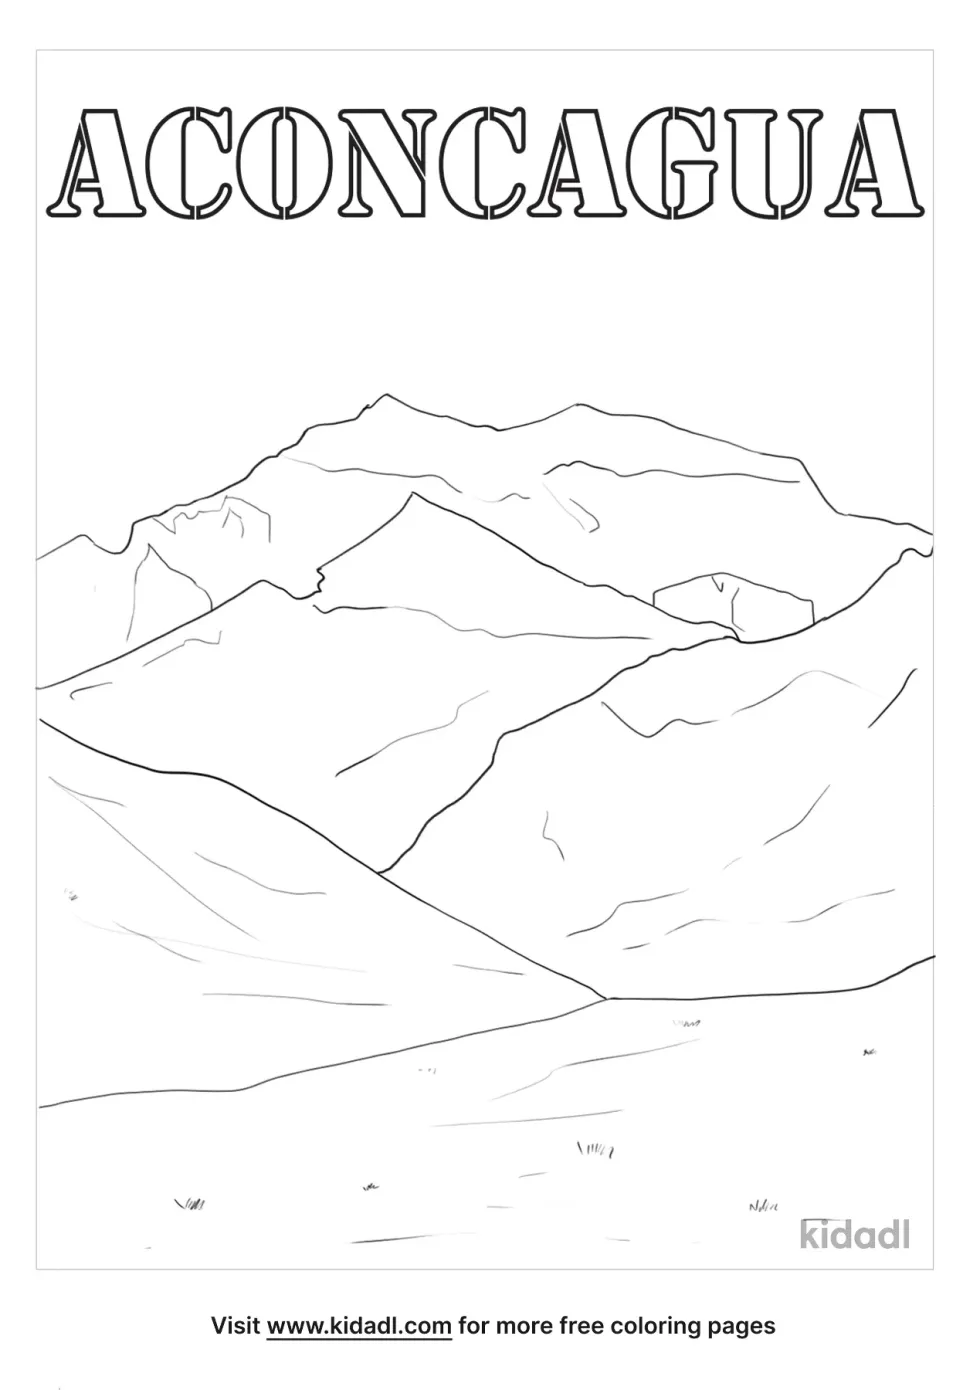 Aconcagua Coloring Page